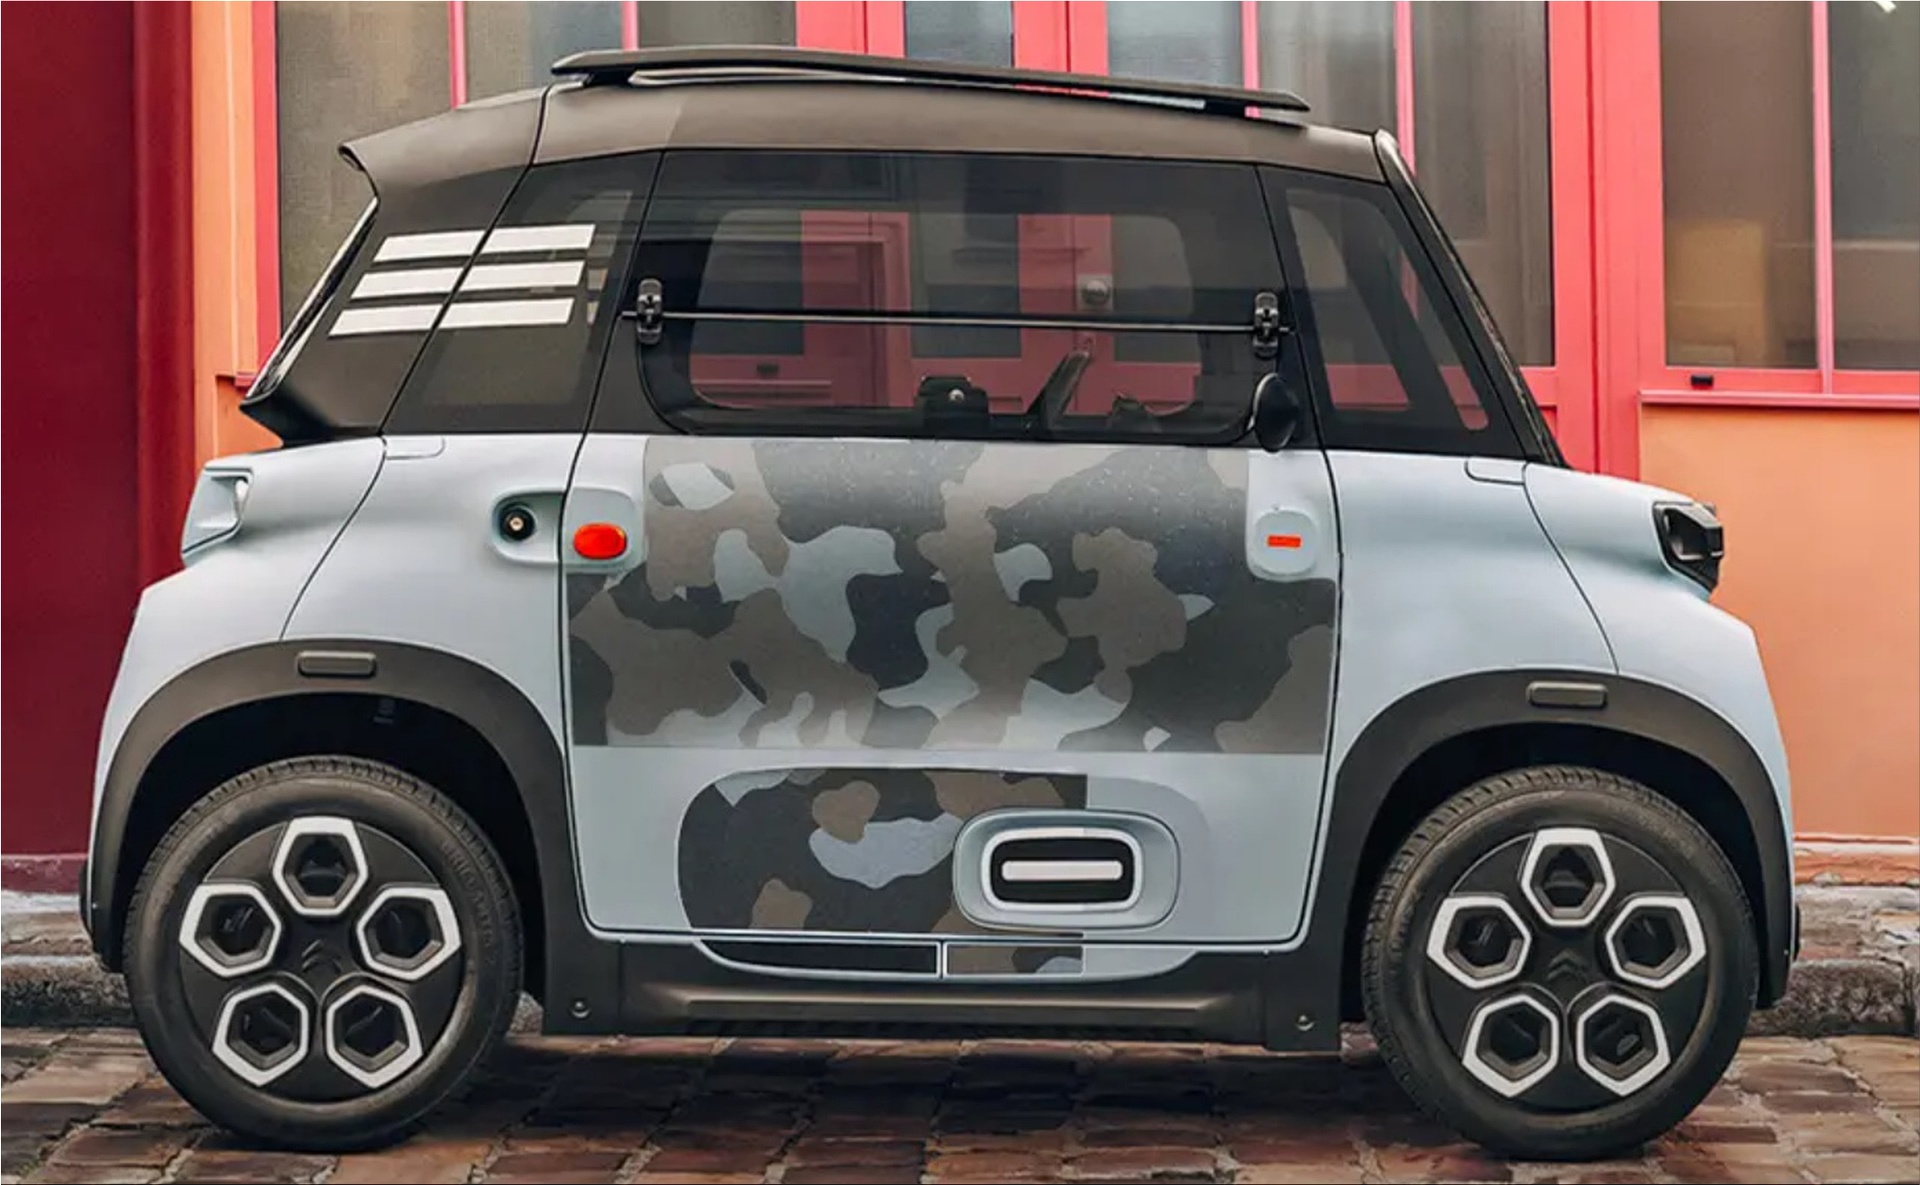 The Citroen Ami electric vehicle is the prize of a competition ...